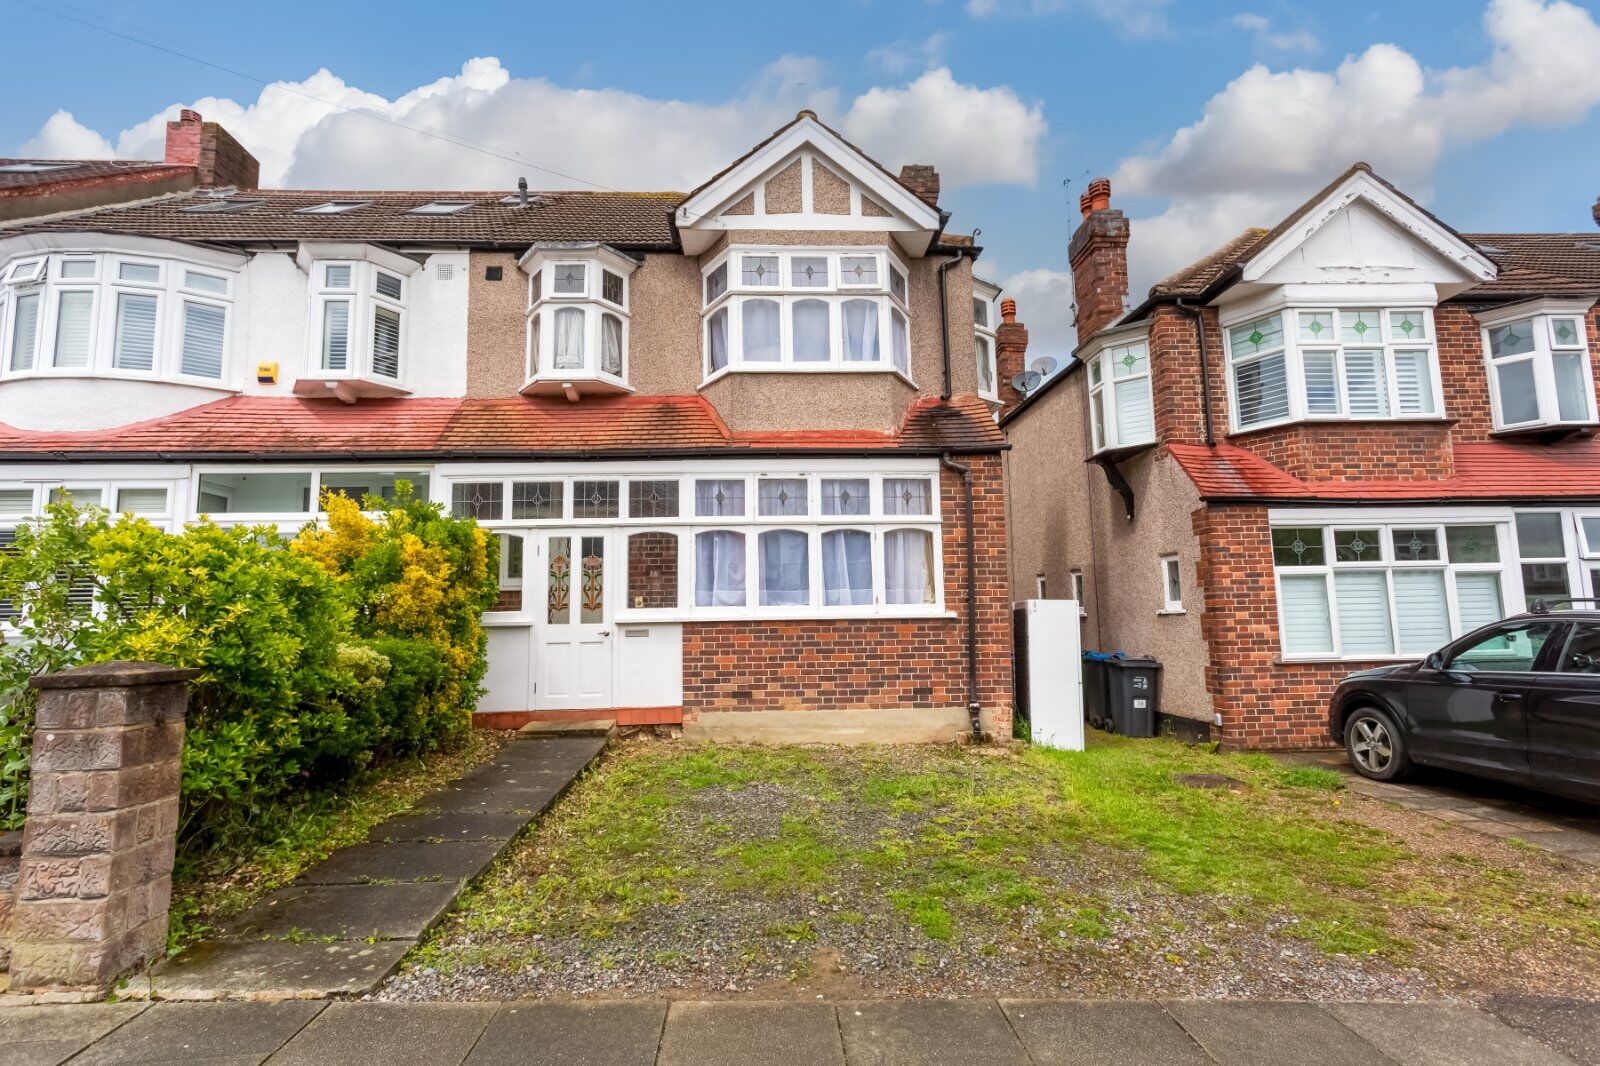 3 bedroom end terraced house for sale The Green, Morden, SM4, main image